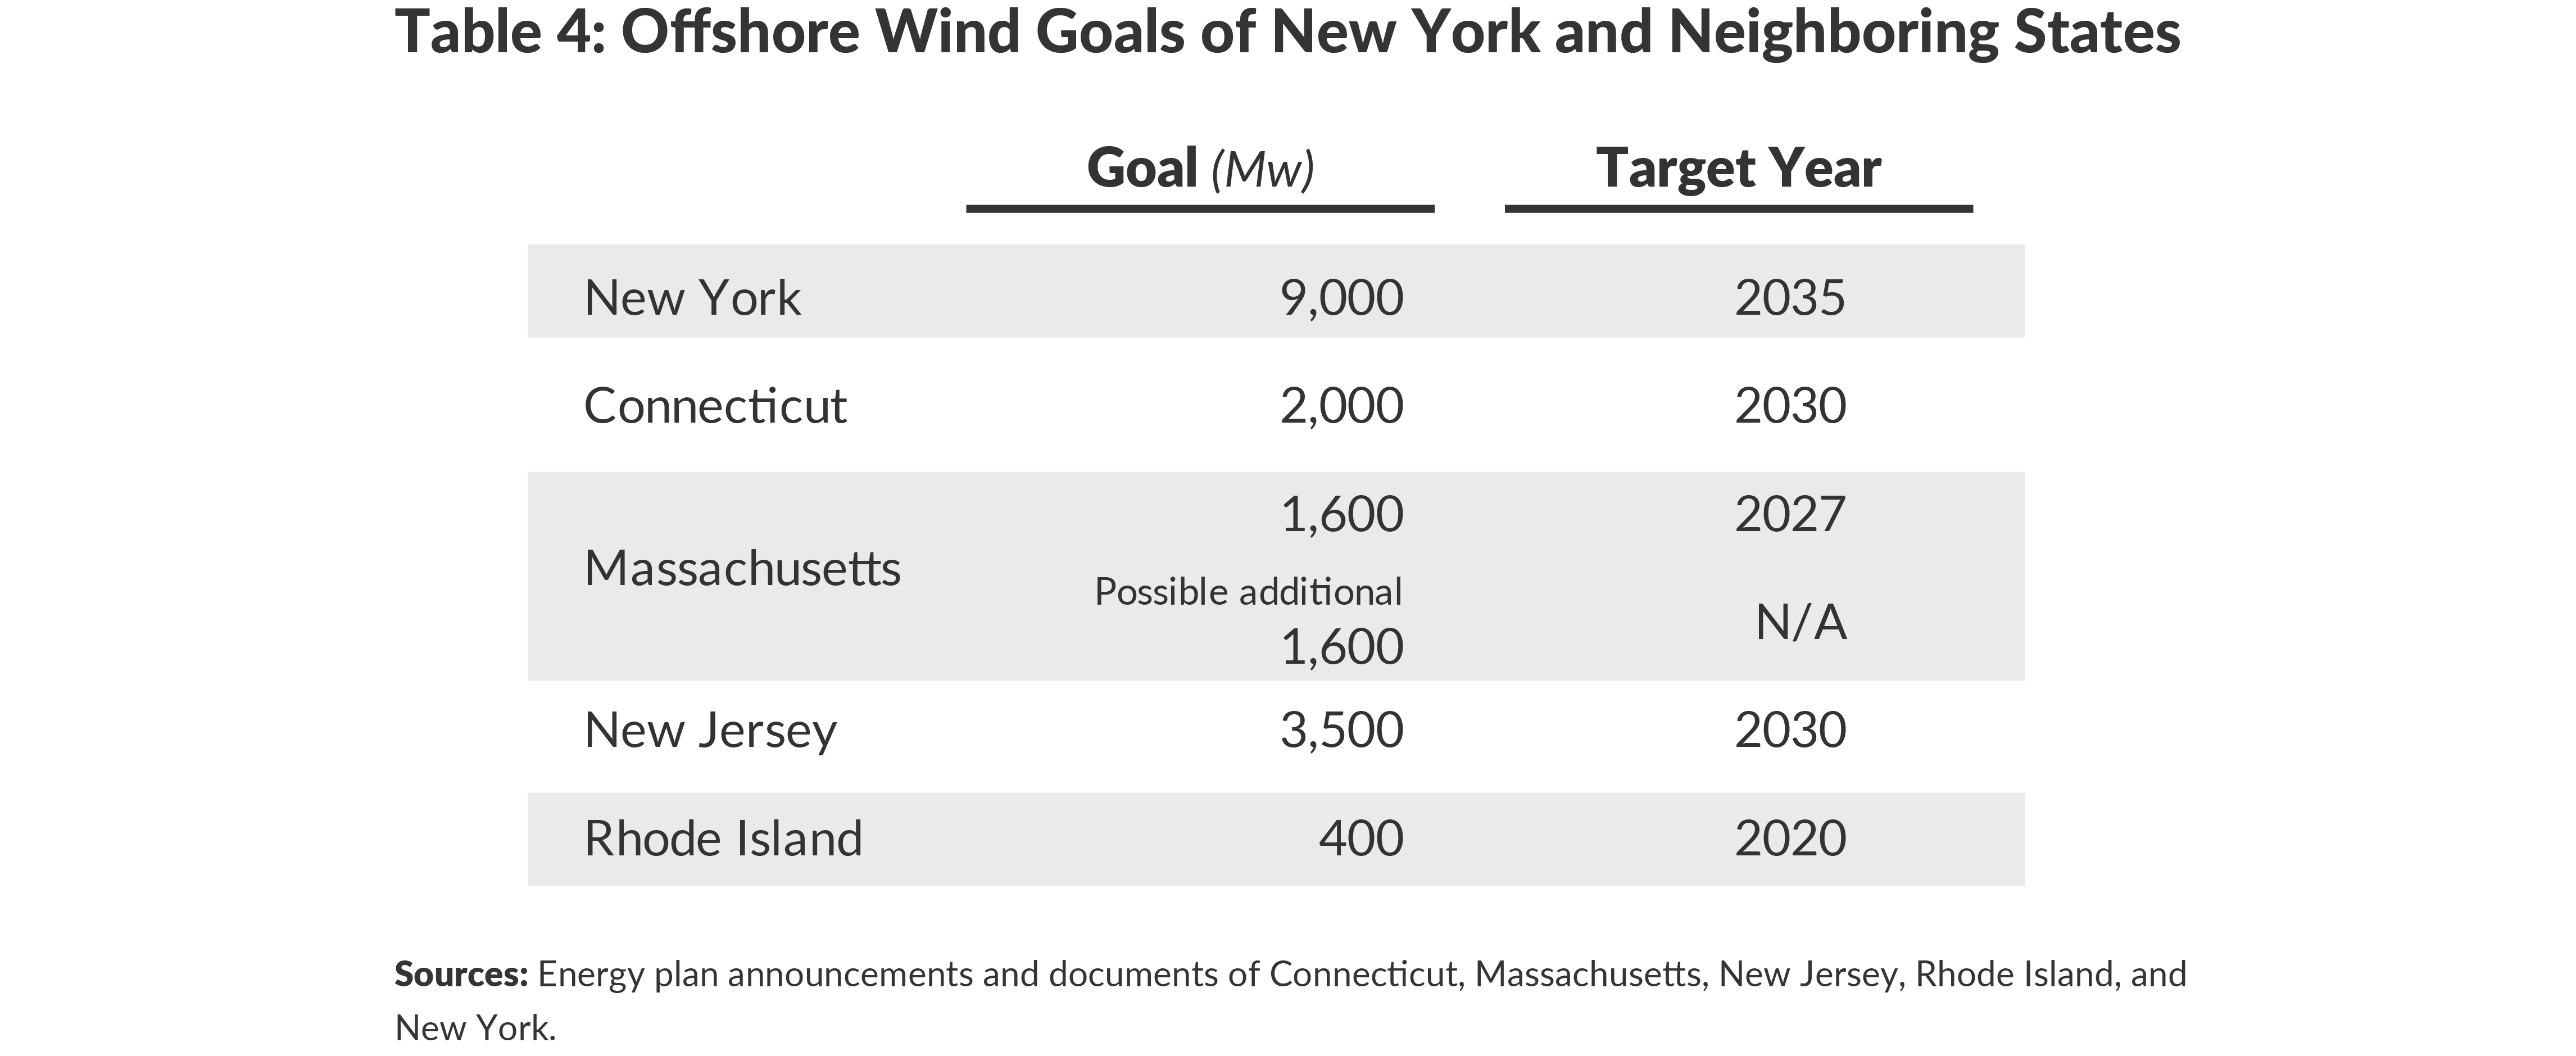 Table 4: Offshore Wind Goals of New York and Neighboring States